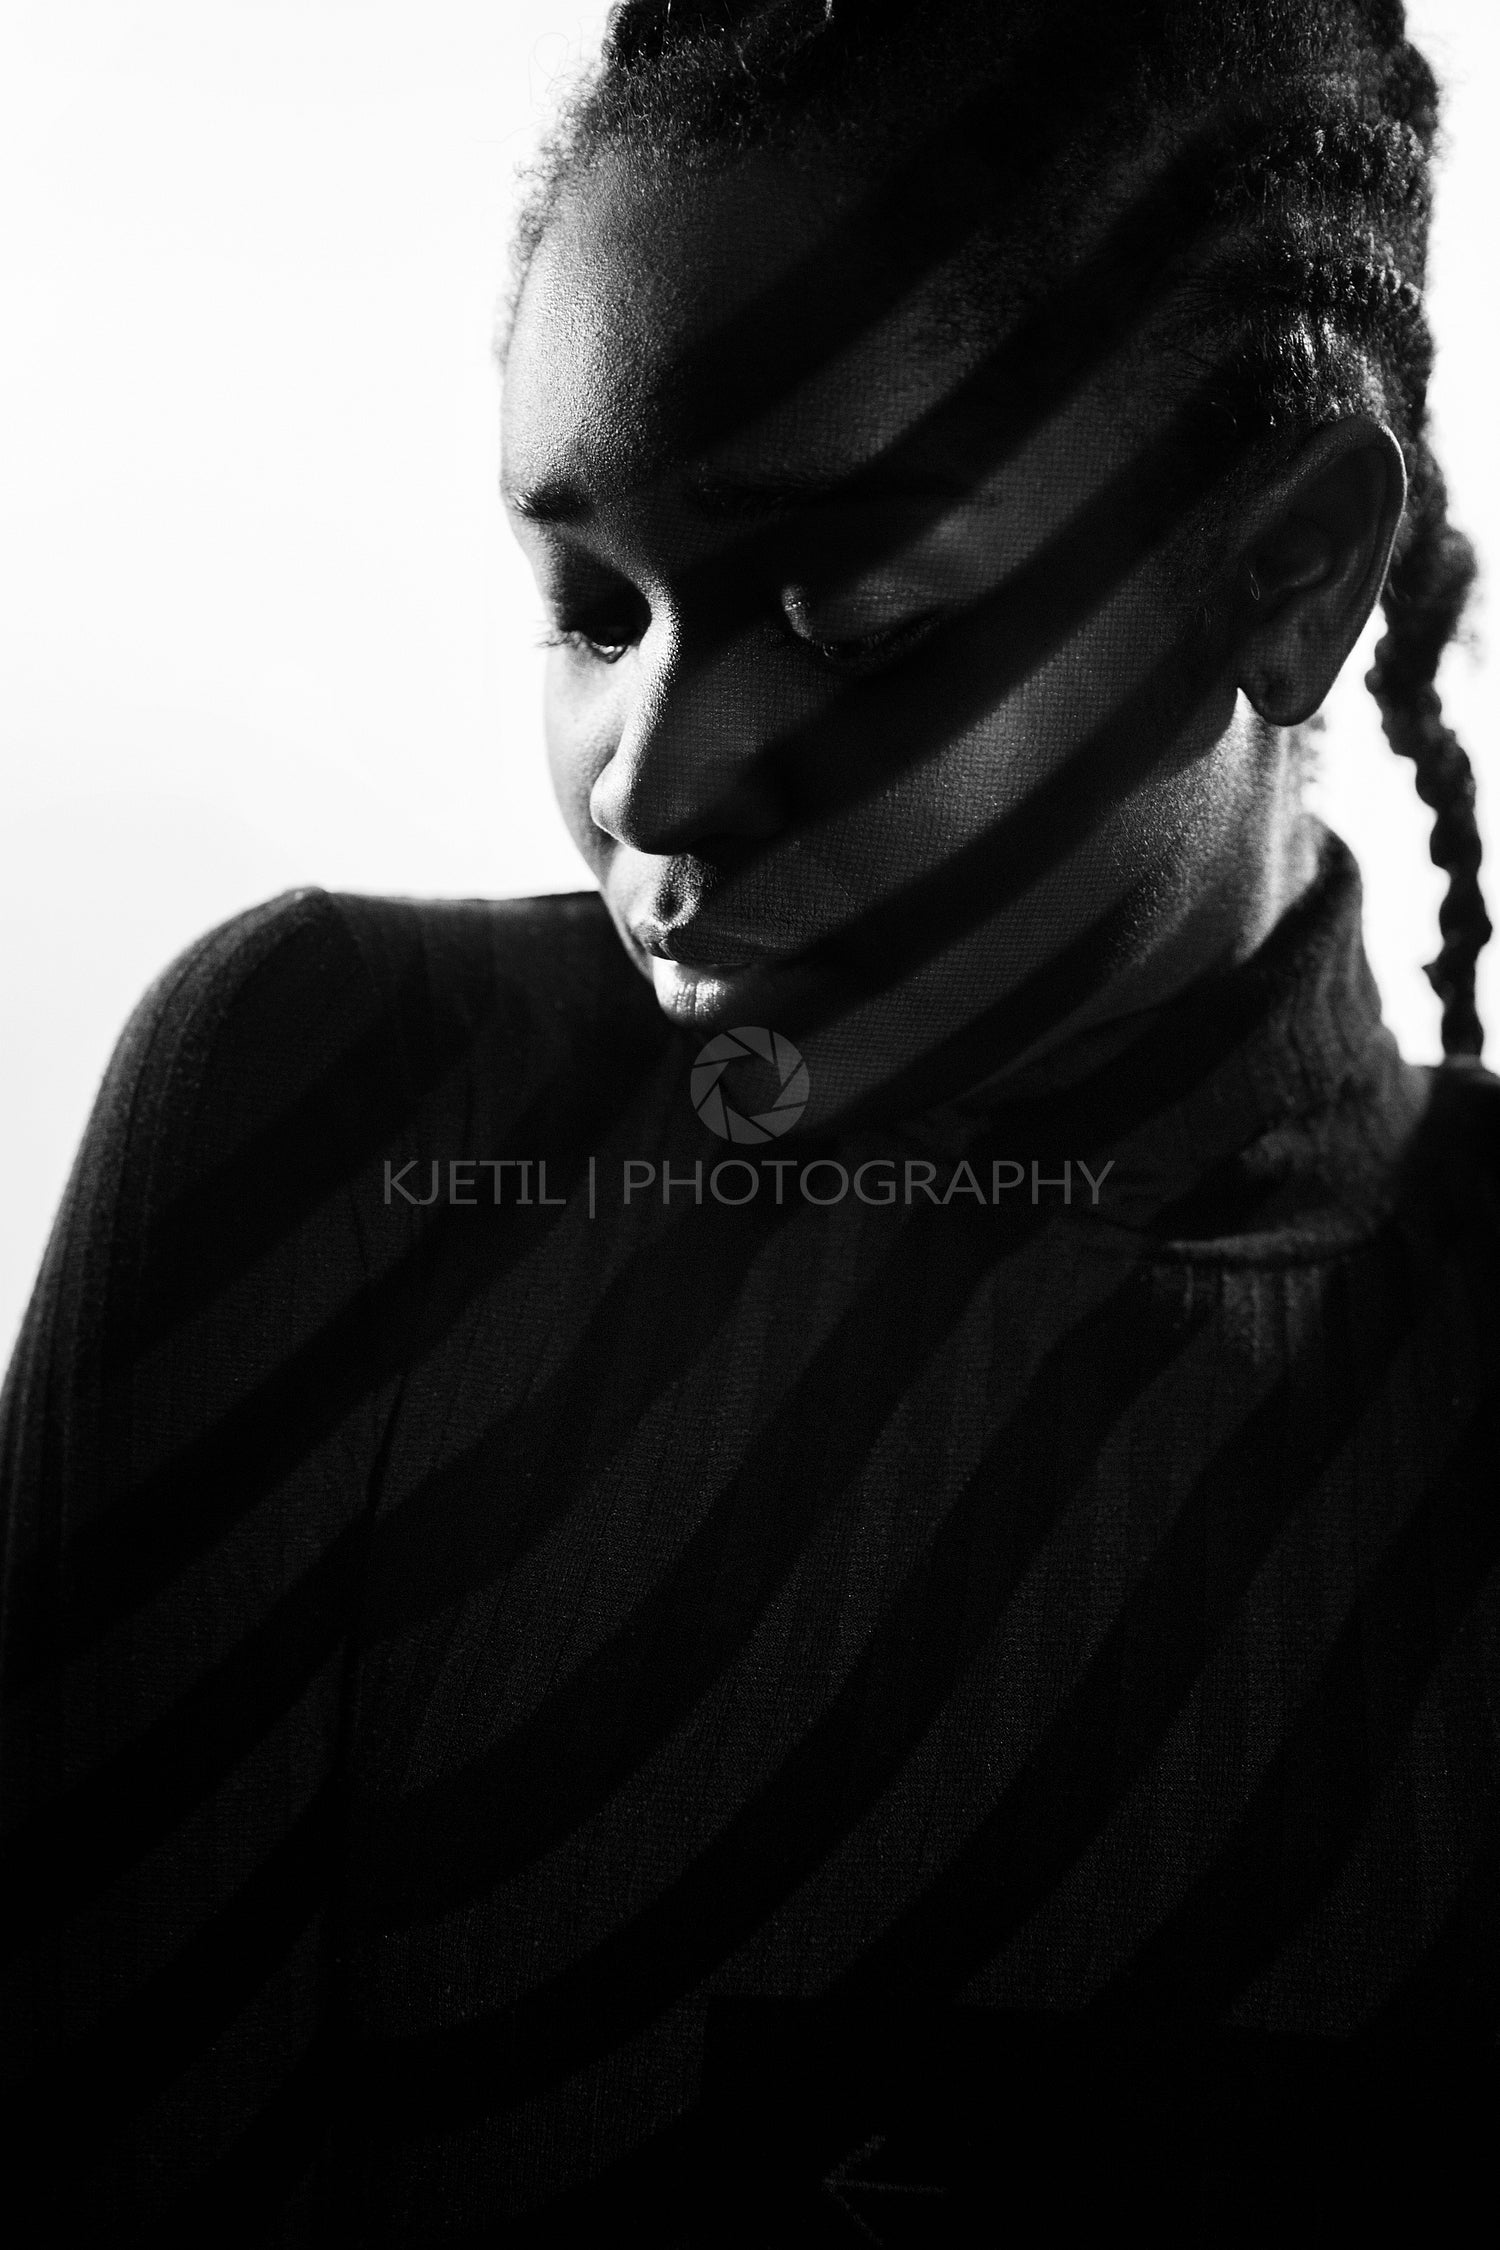 Creative light stripes from a projection on beautiful woman with dark skin